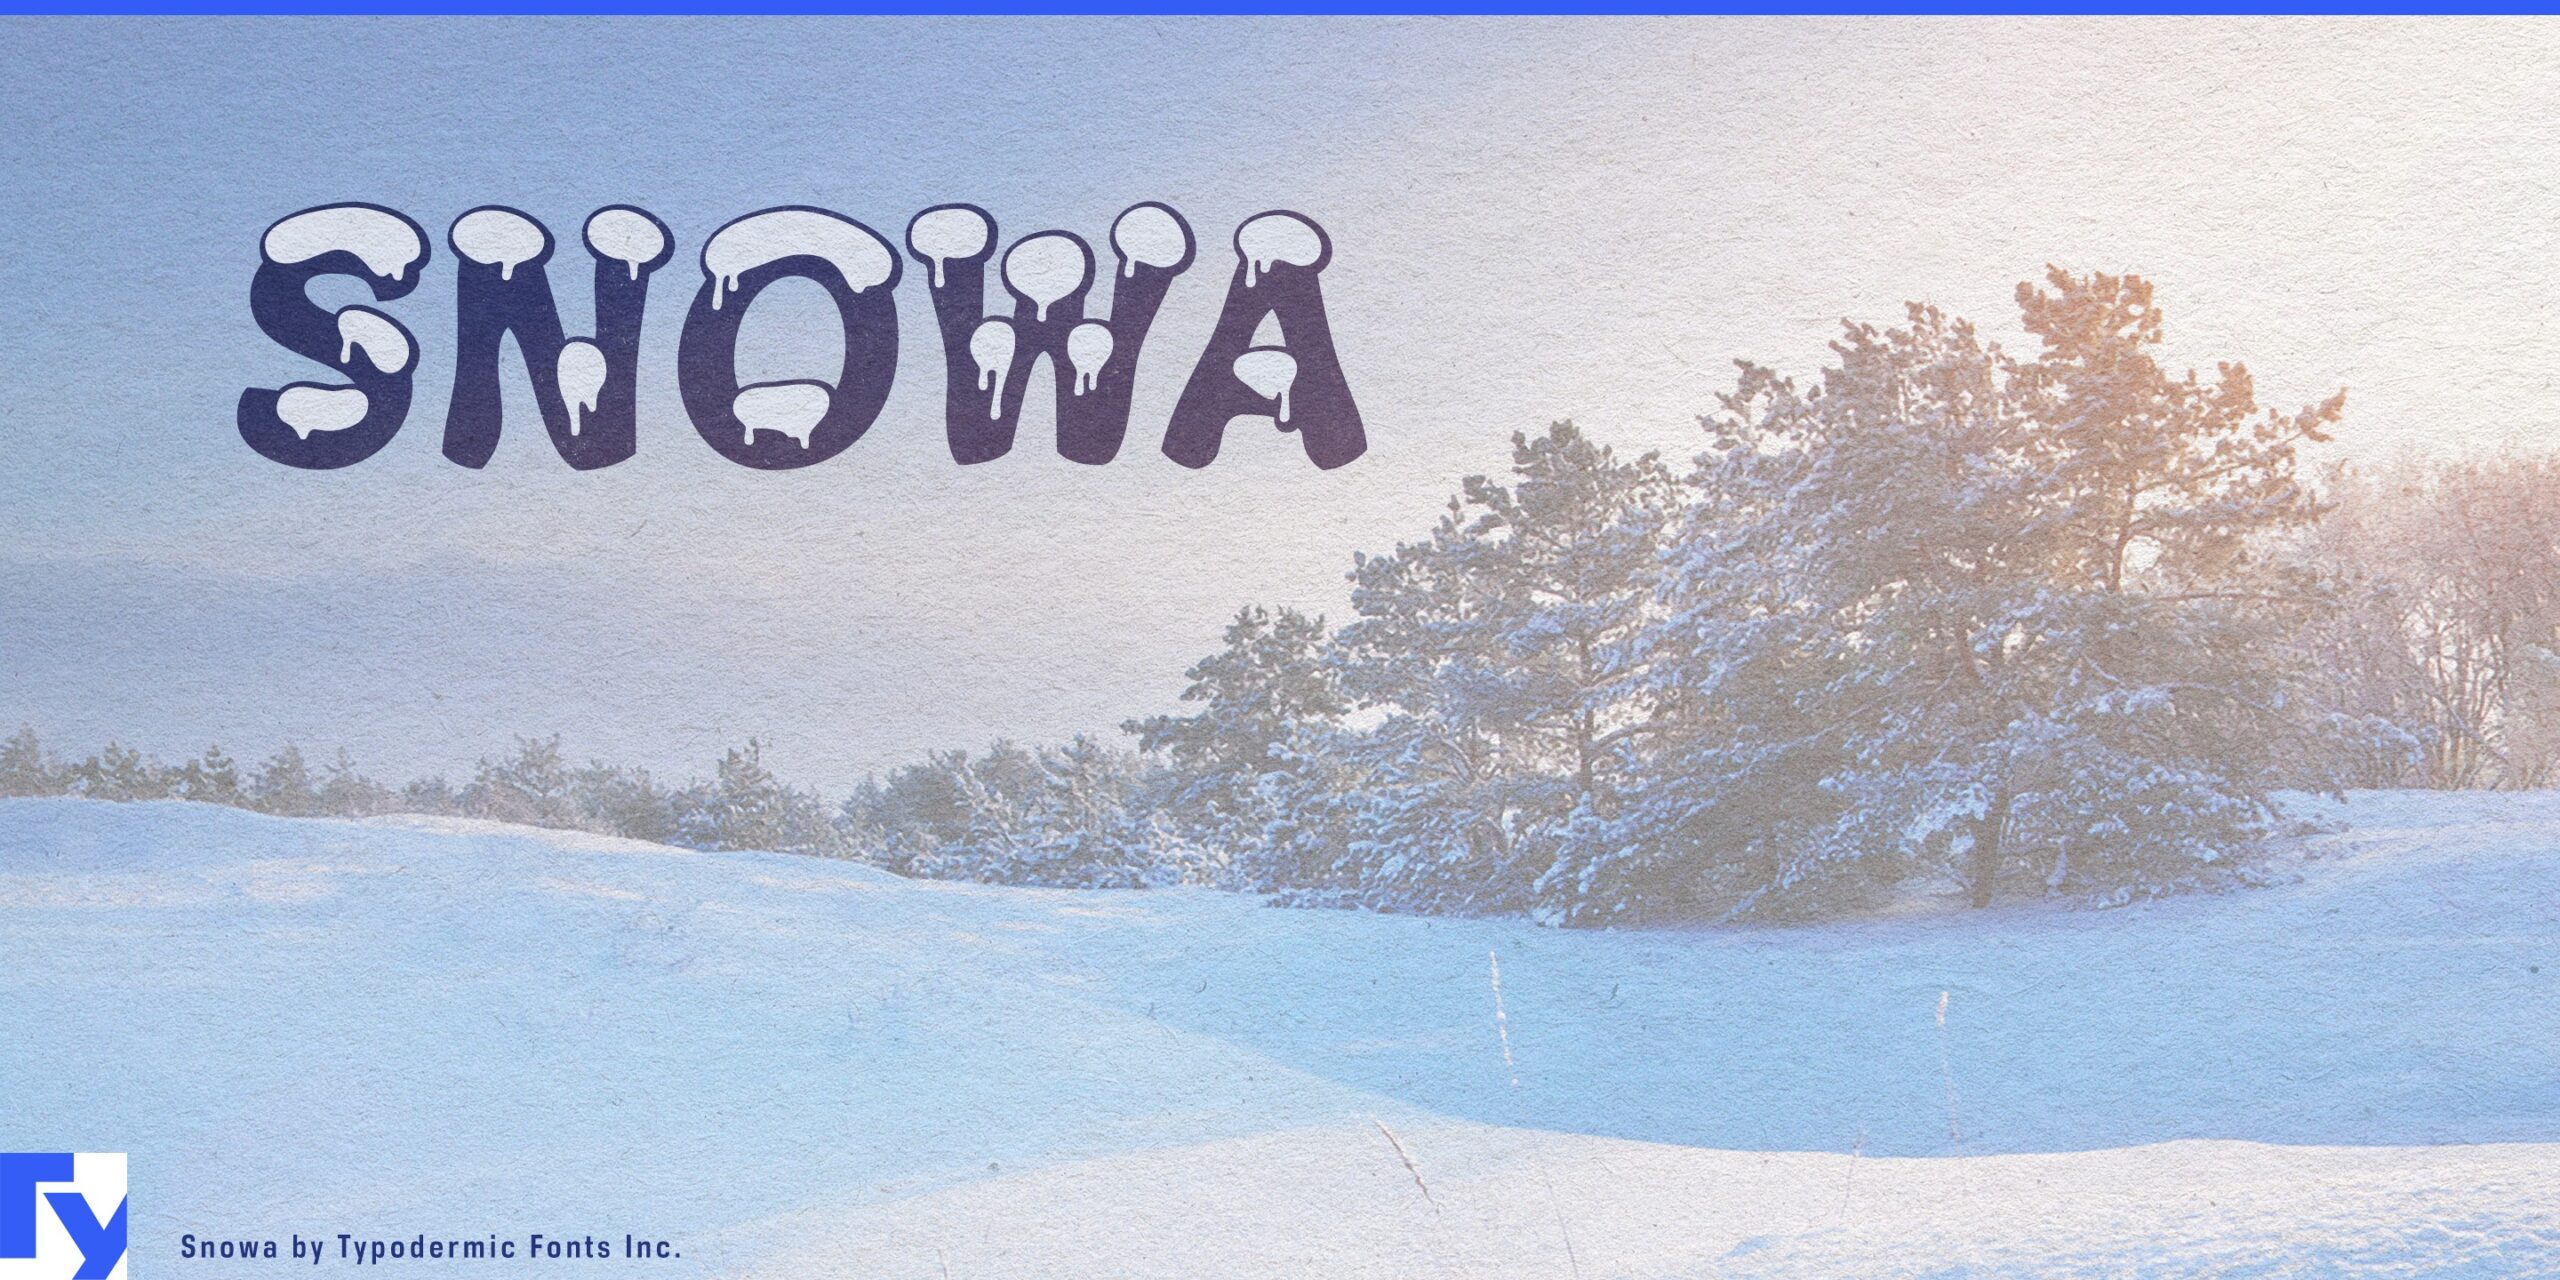 Make your text sparkle like freshly fallen snow with Snowa's shimmering letterforms.